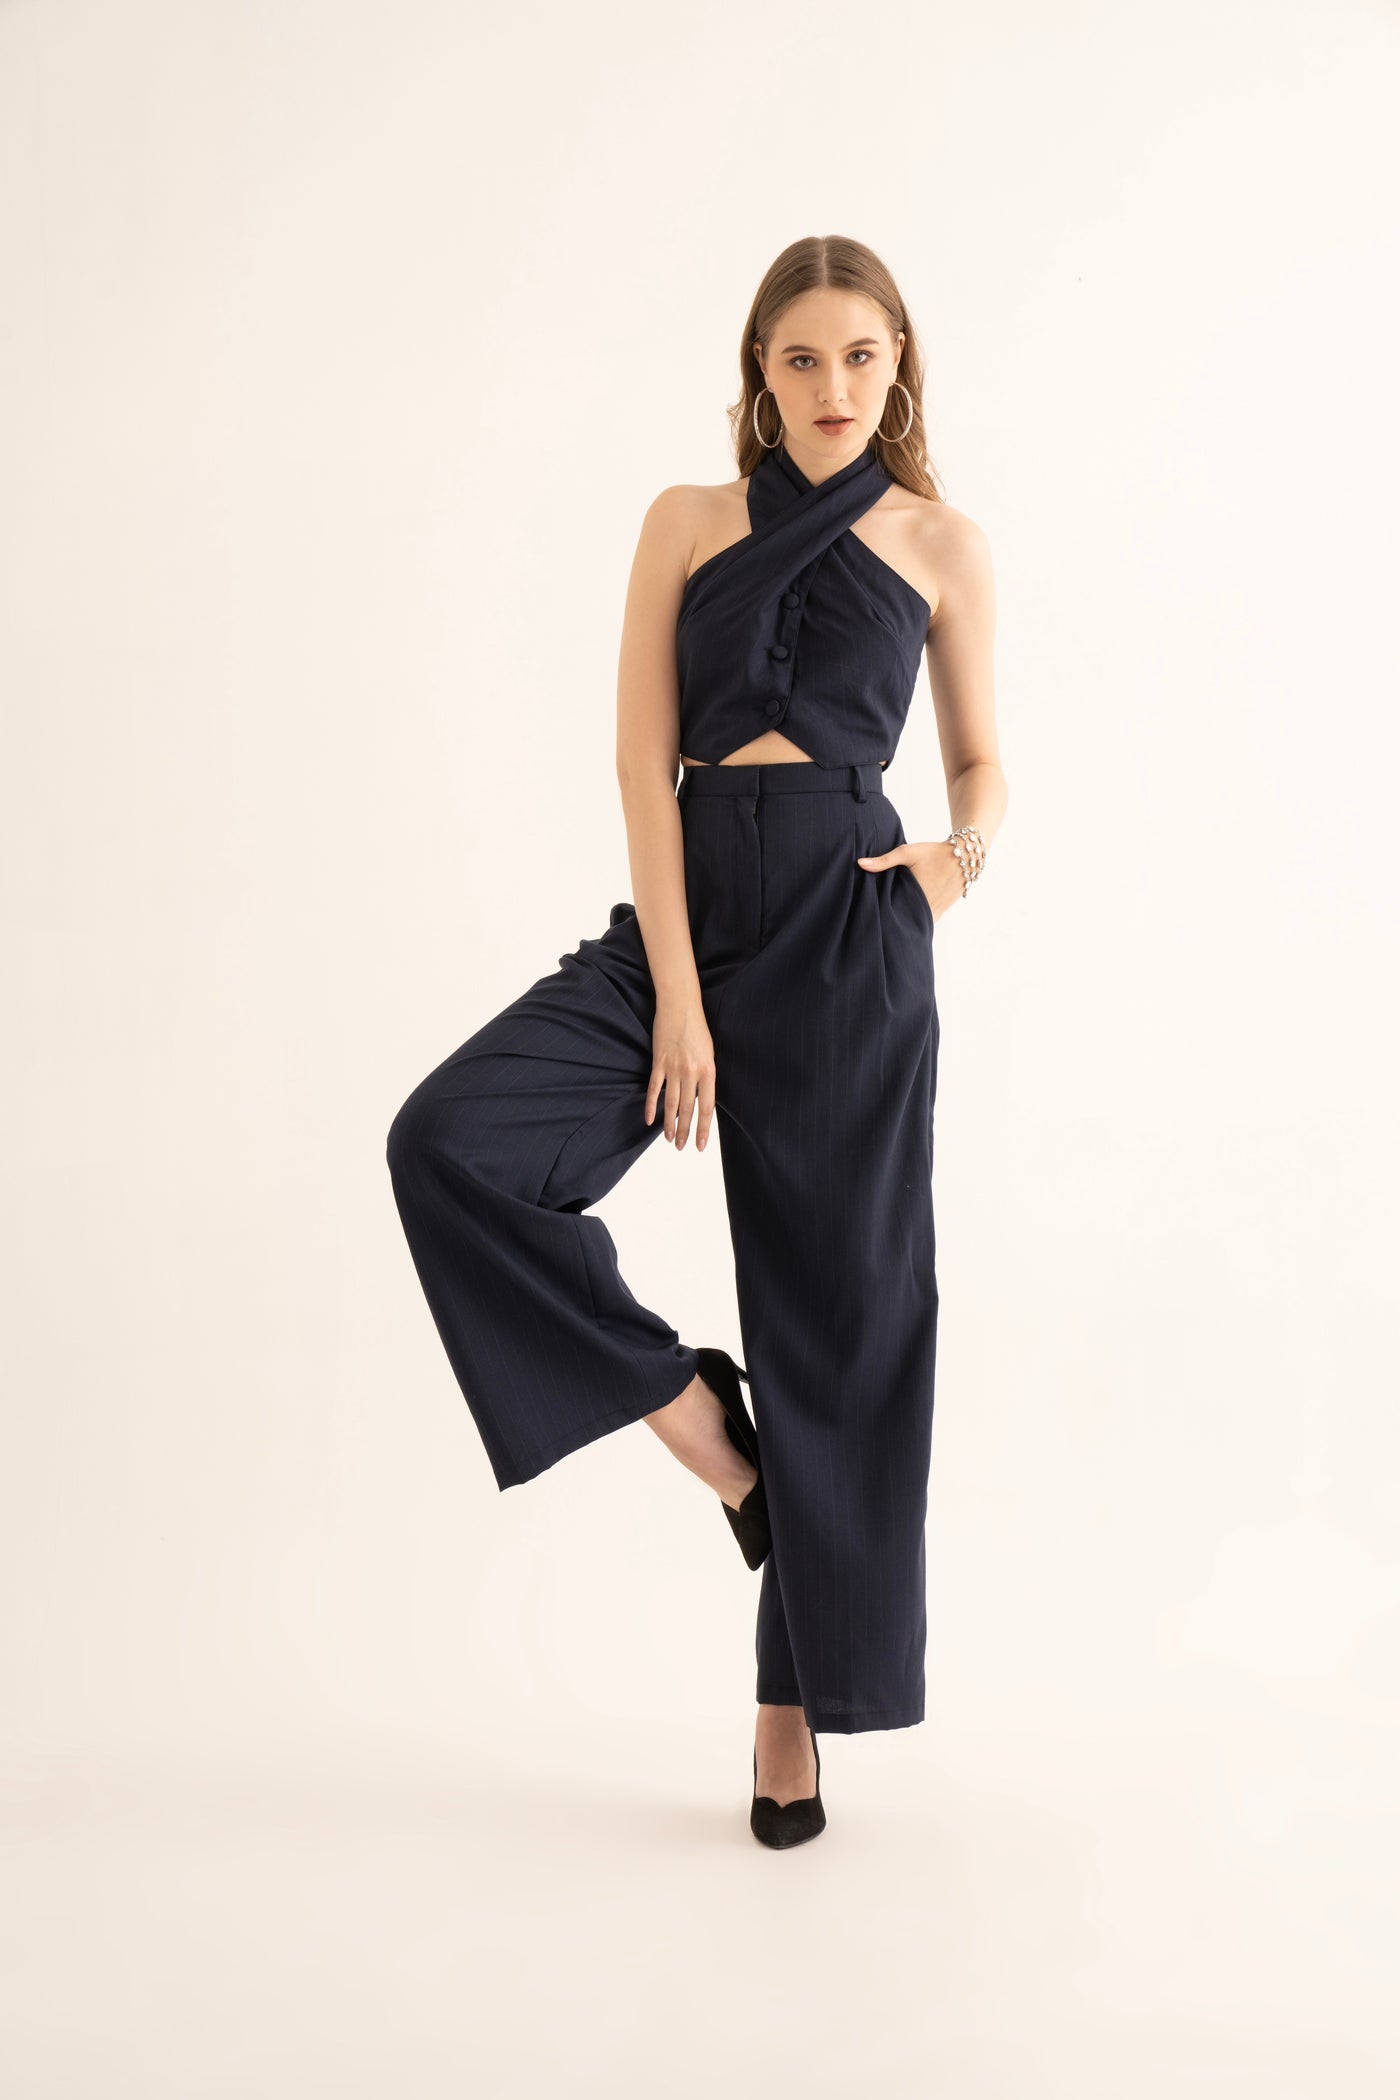 Black Pinstripe Halter Waistcoat and Suiting Pants Co-ord